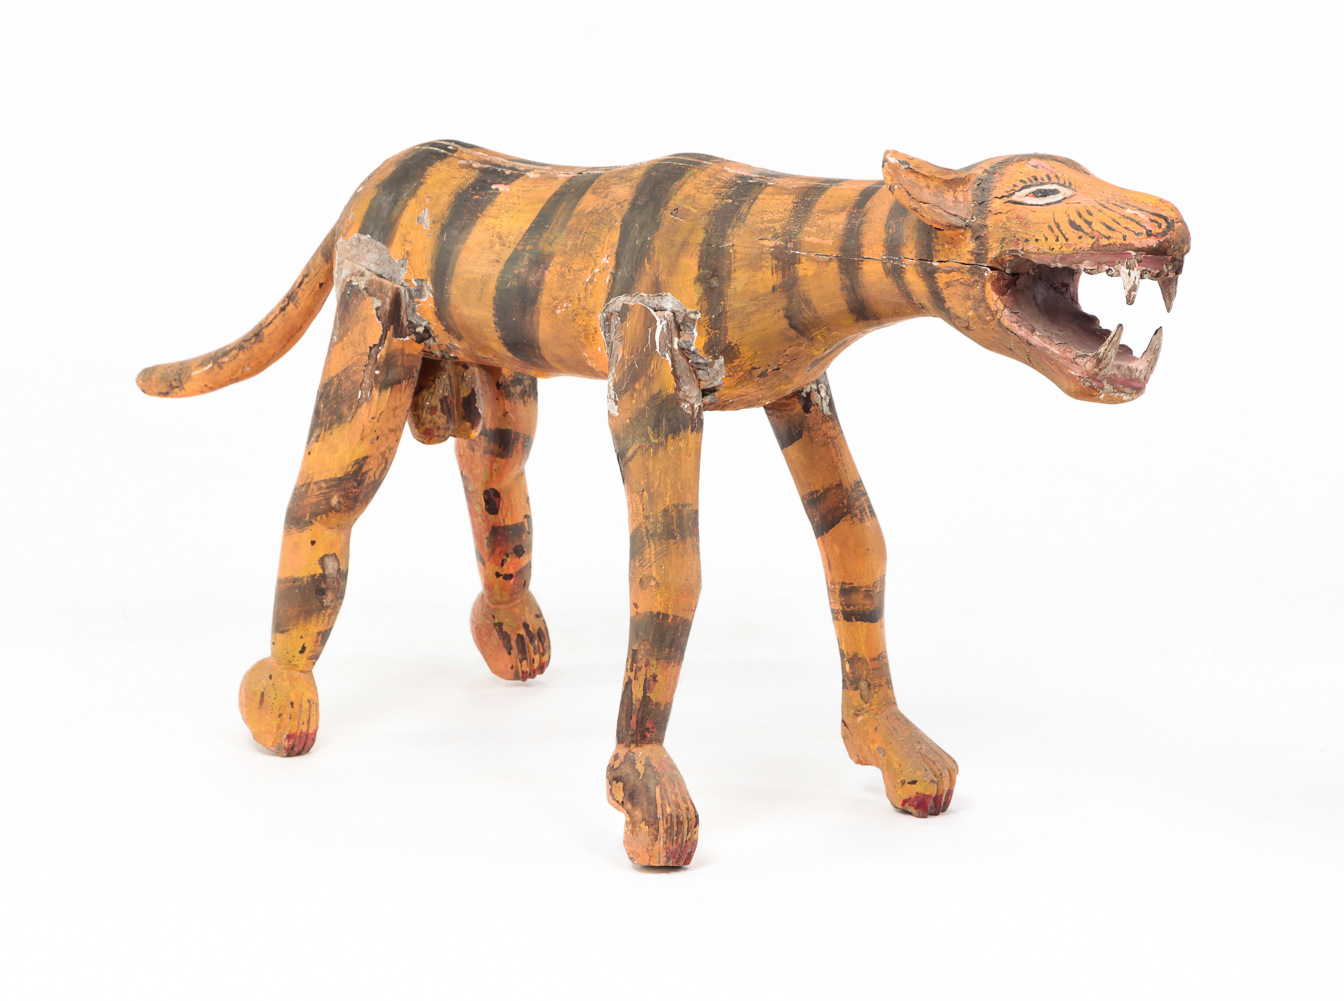 FOLK ART STANDING TIGER. Late 19th-early